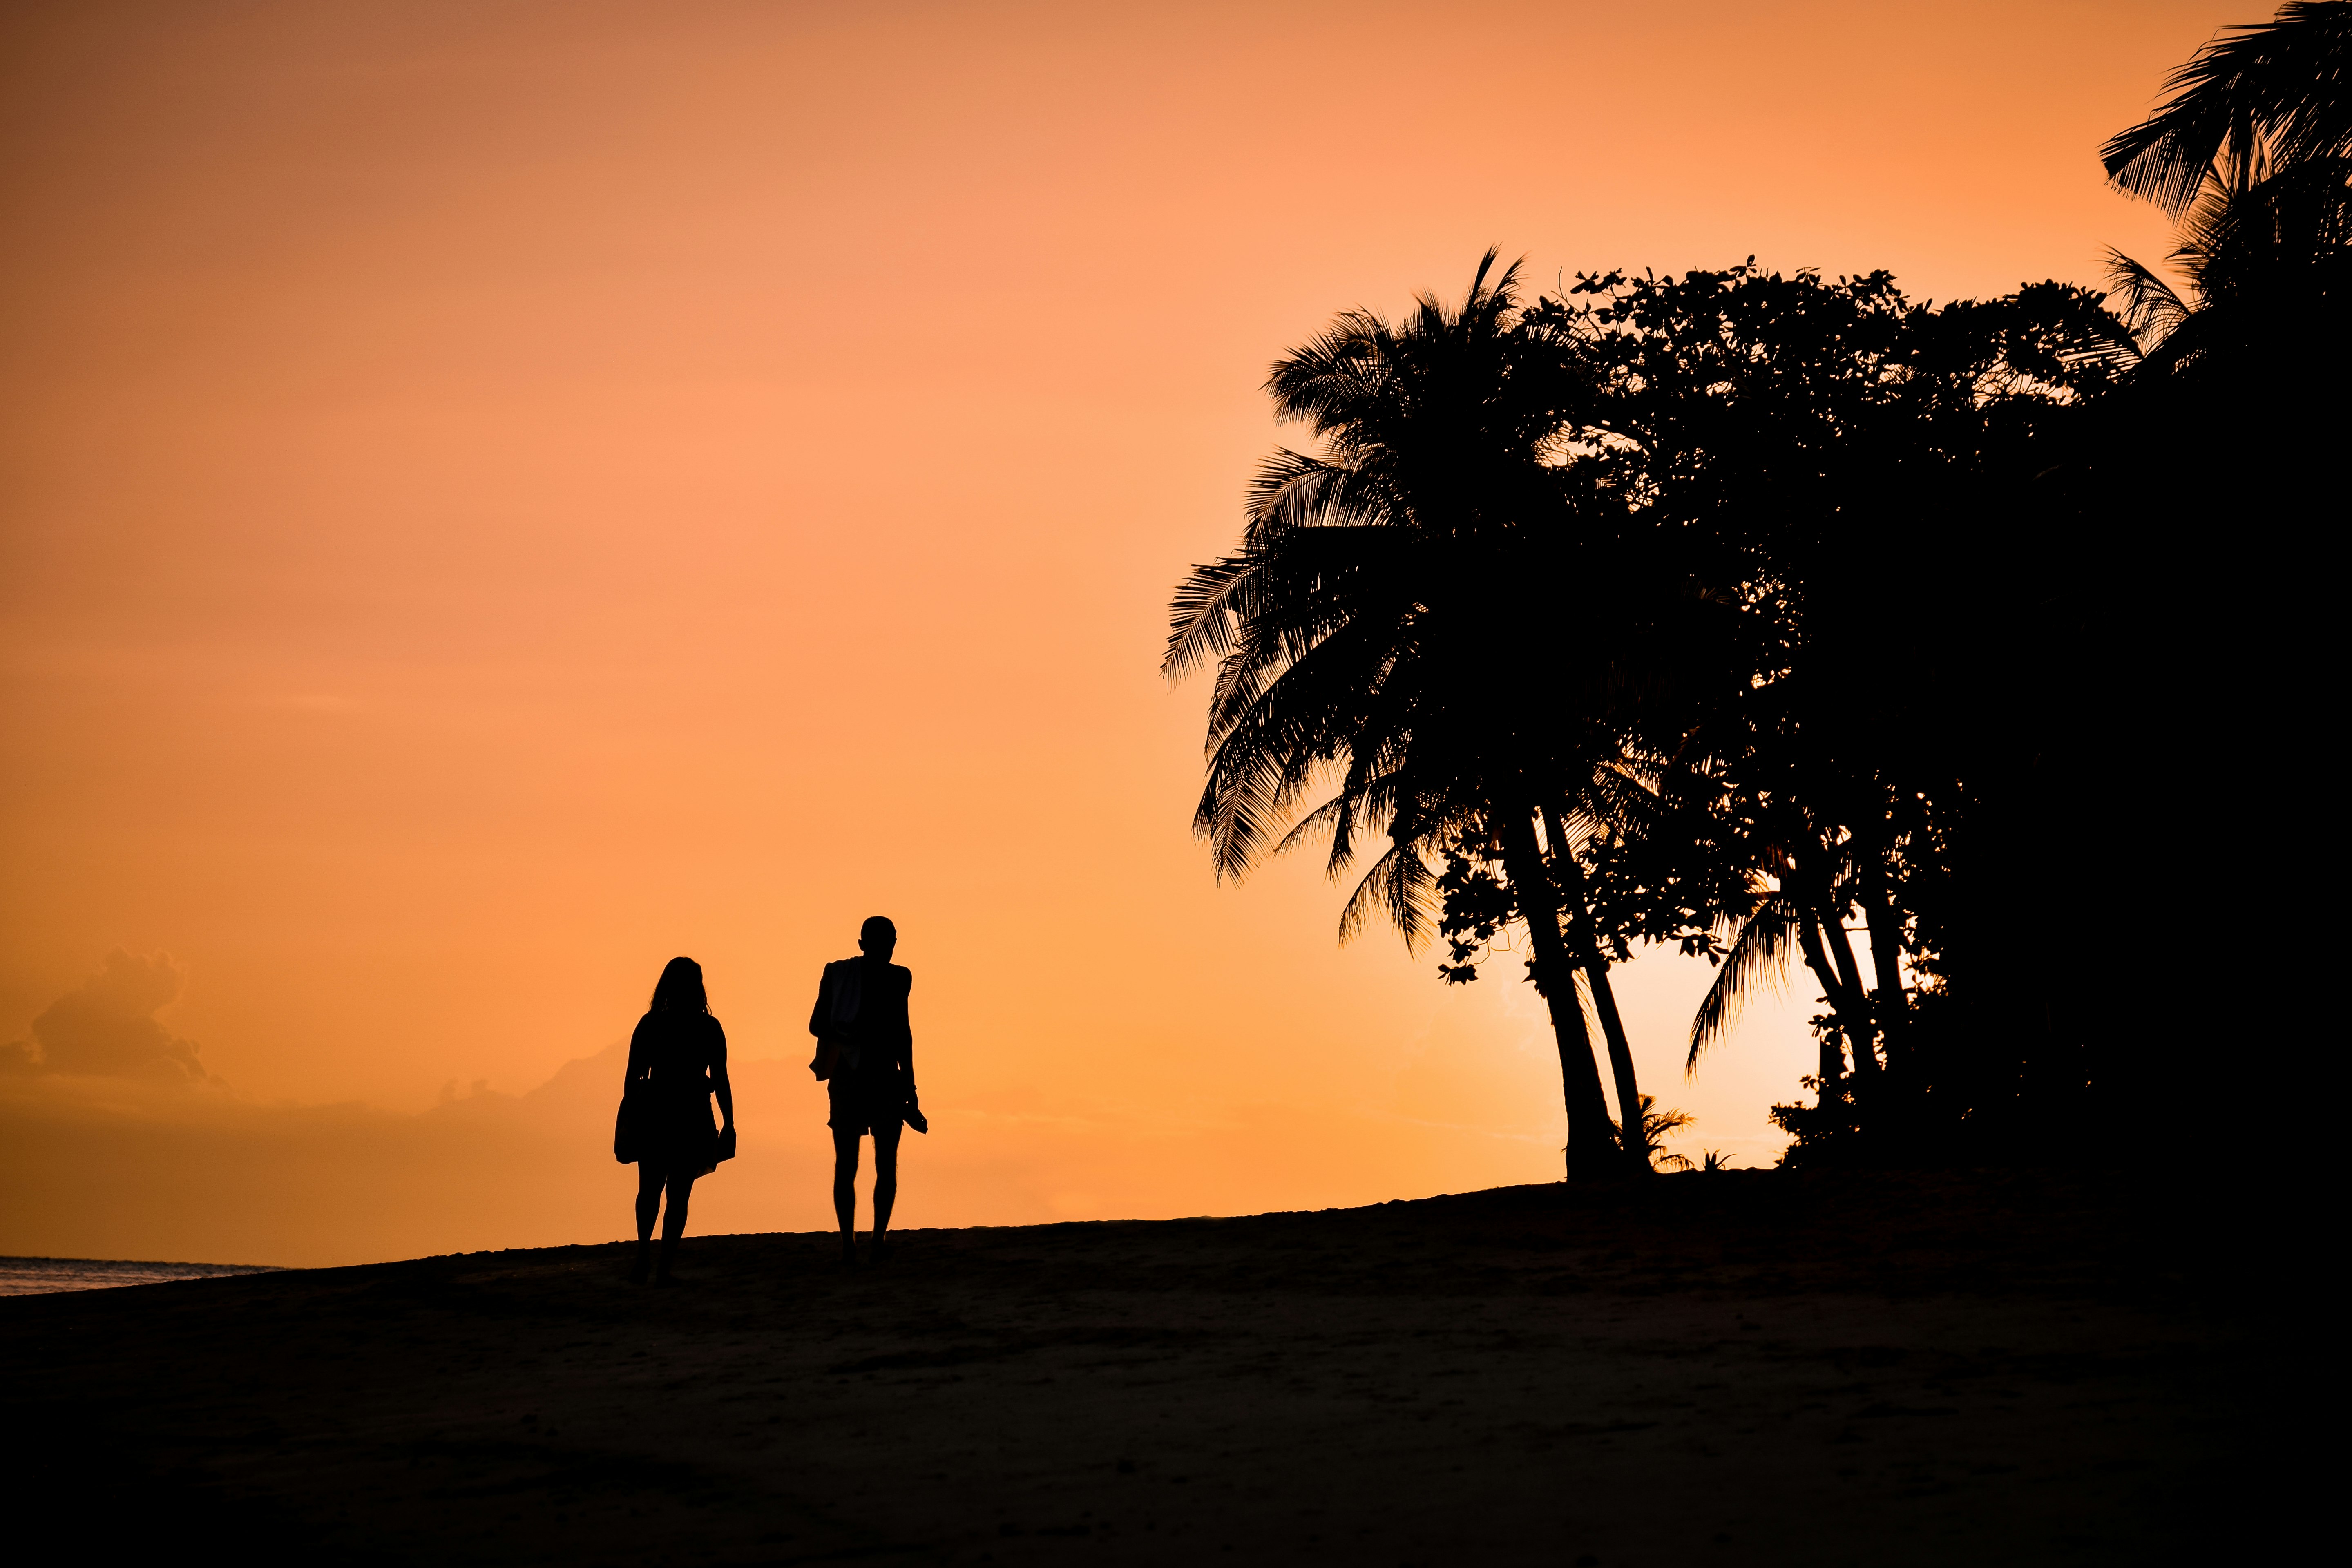 silhouette of man and woman standing on sand during sunset